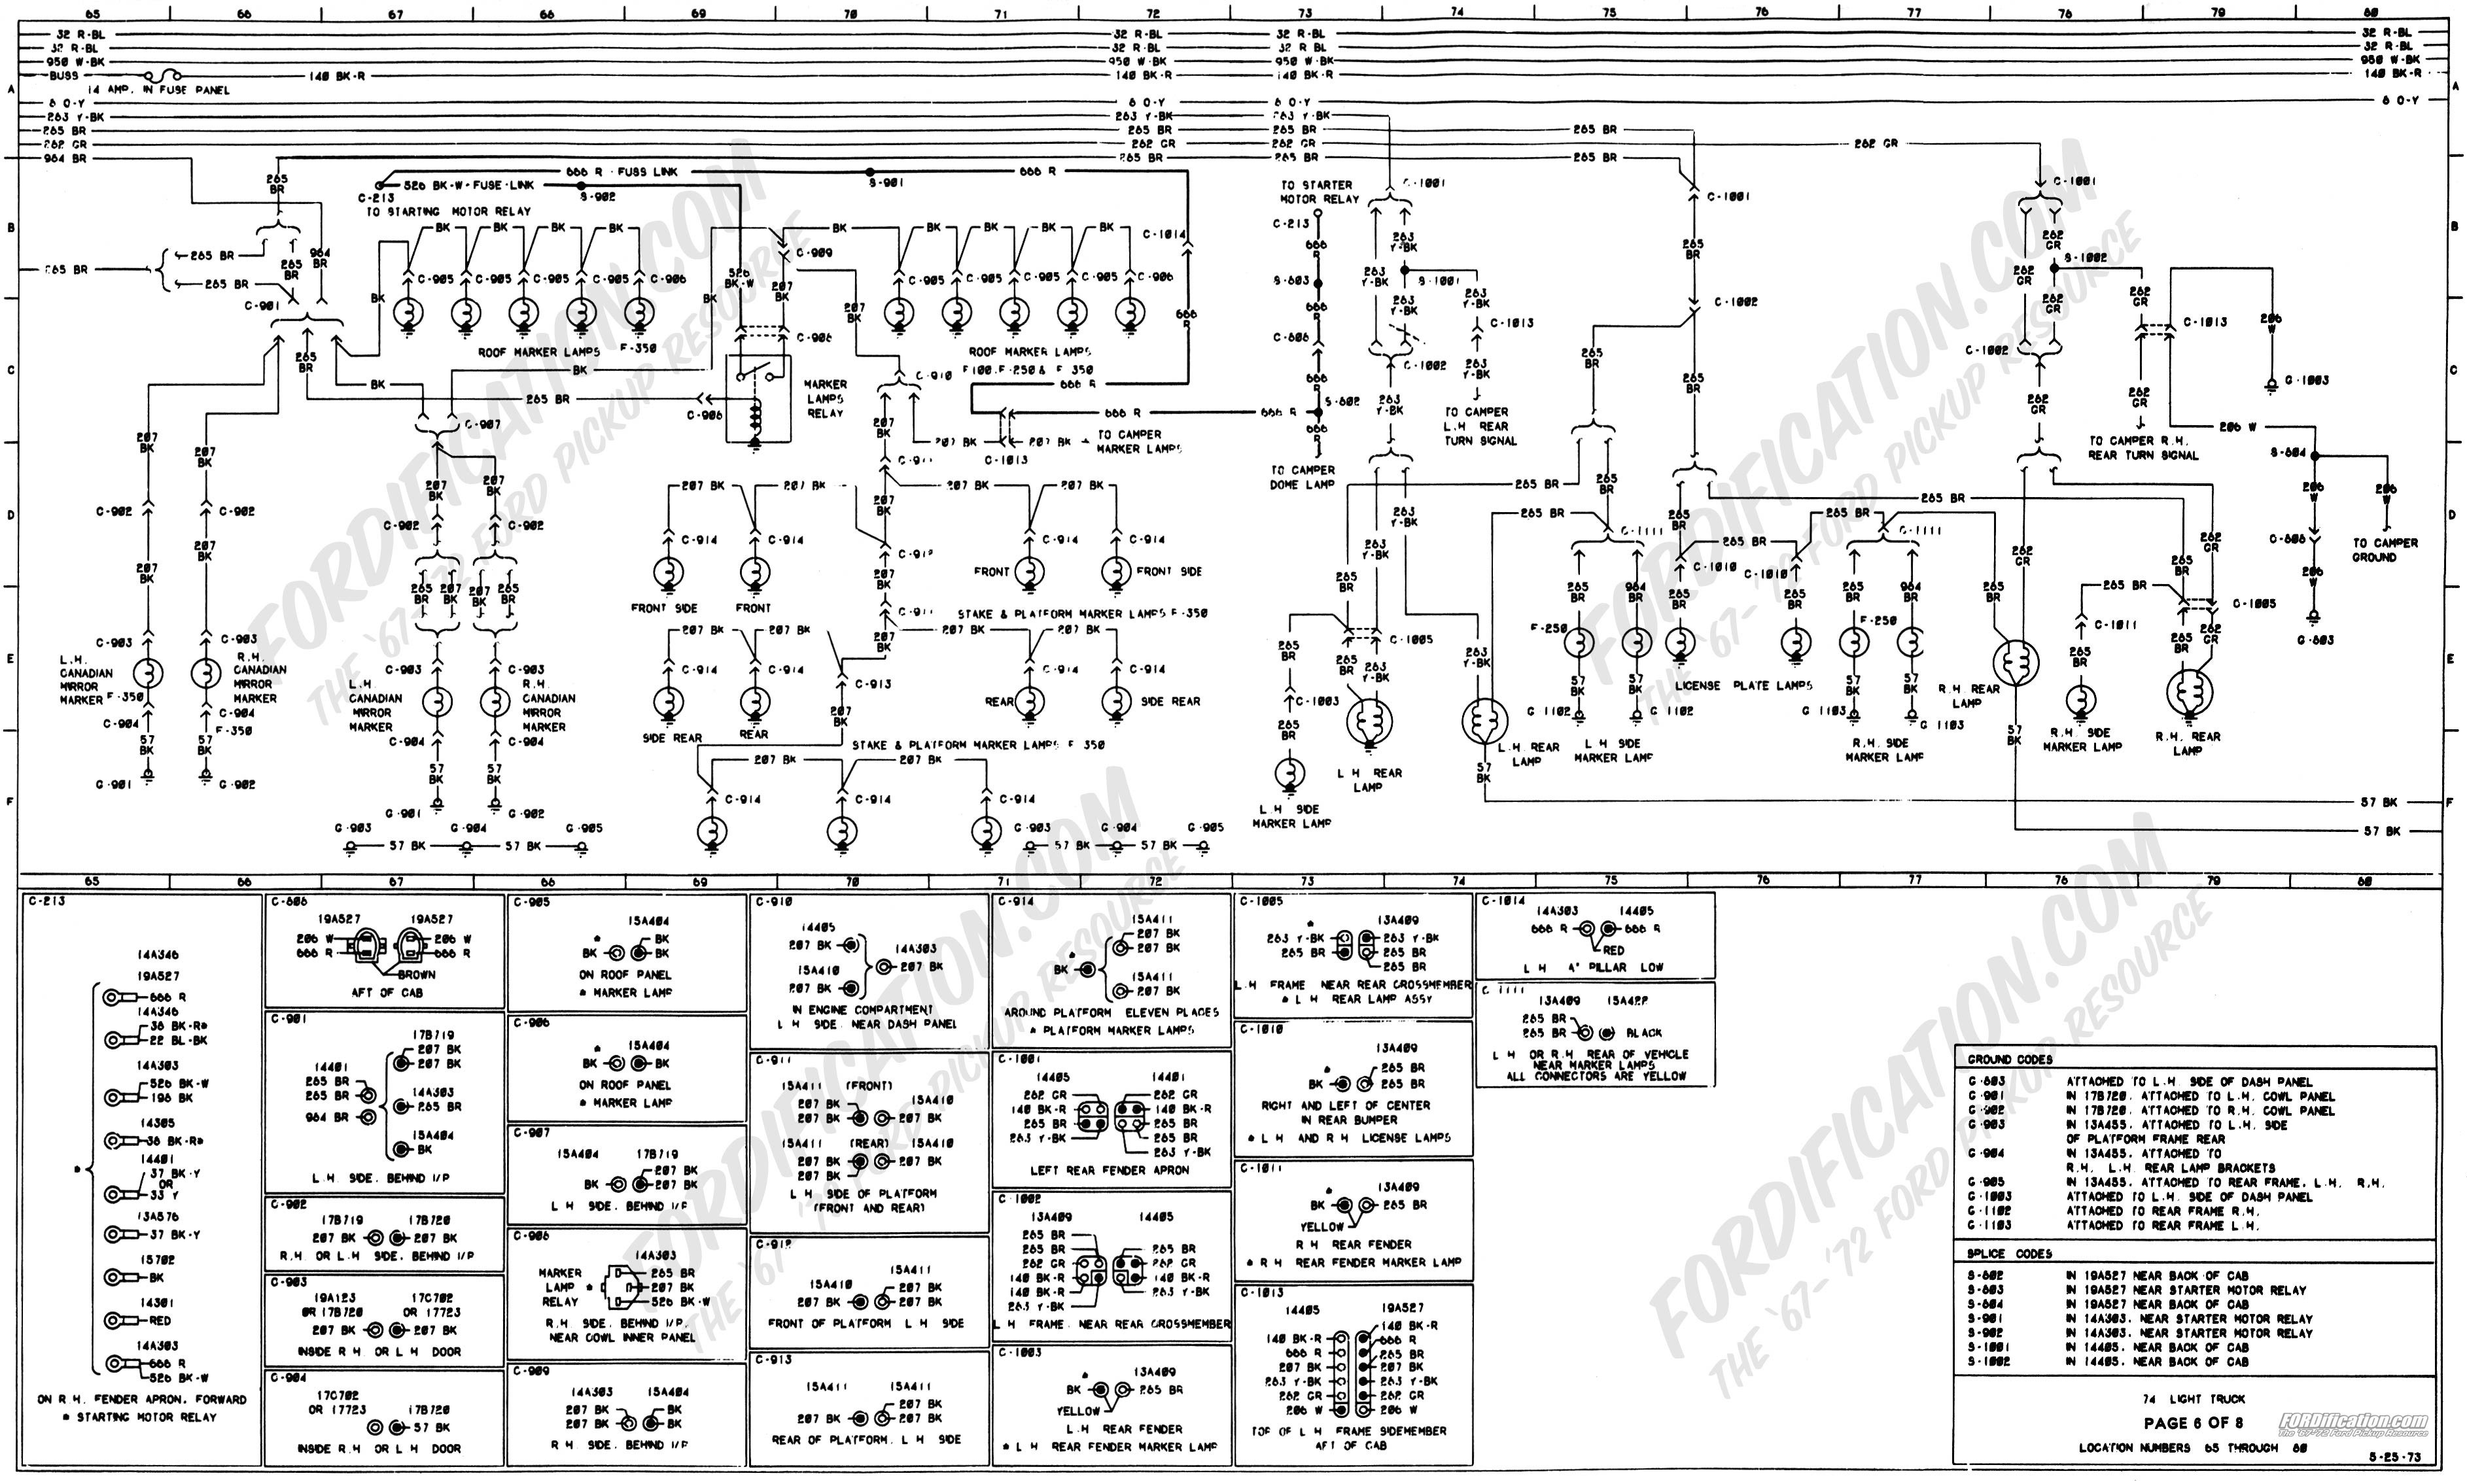 Ford Radio Wiring Harness Diagram Awesome 1973 1979 ford Truck Wiring Diagrams & Schematics fordification